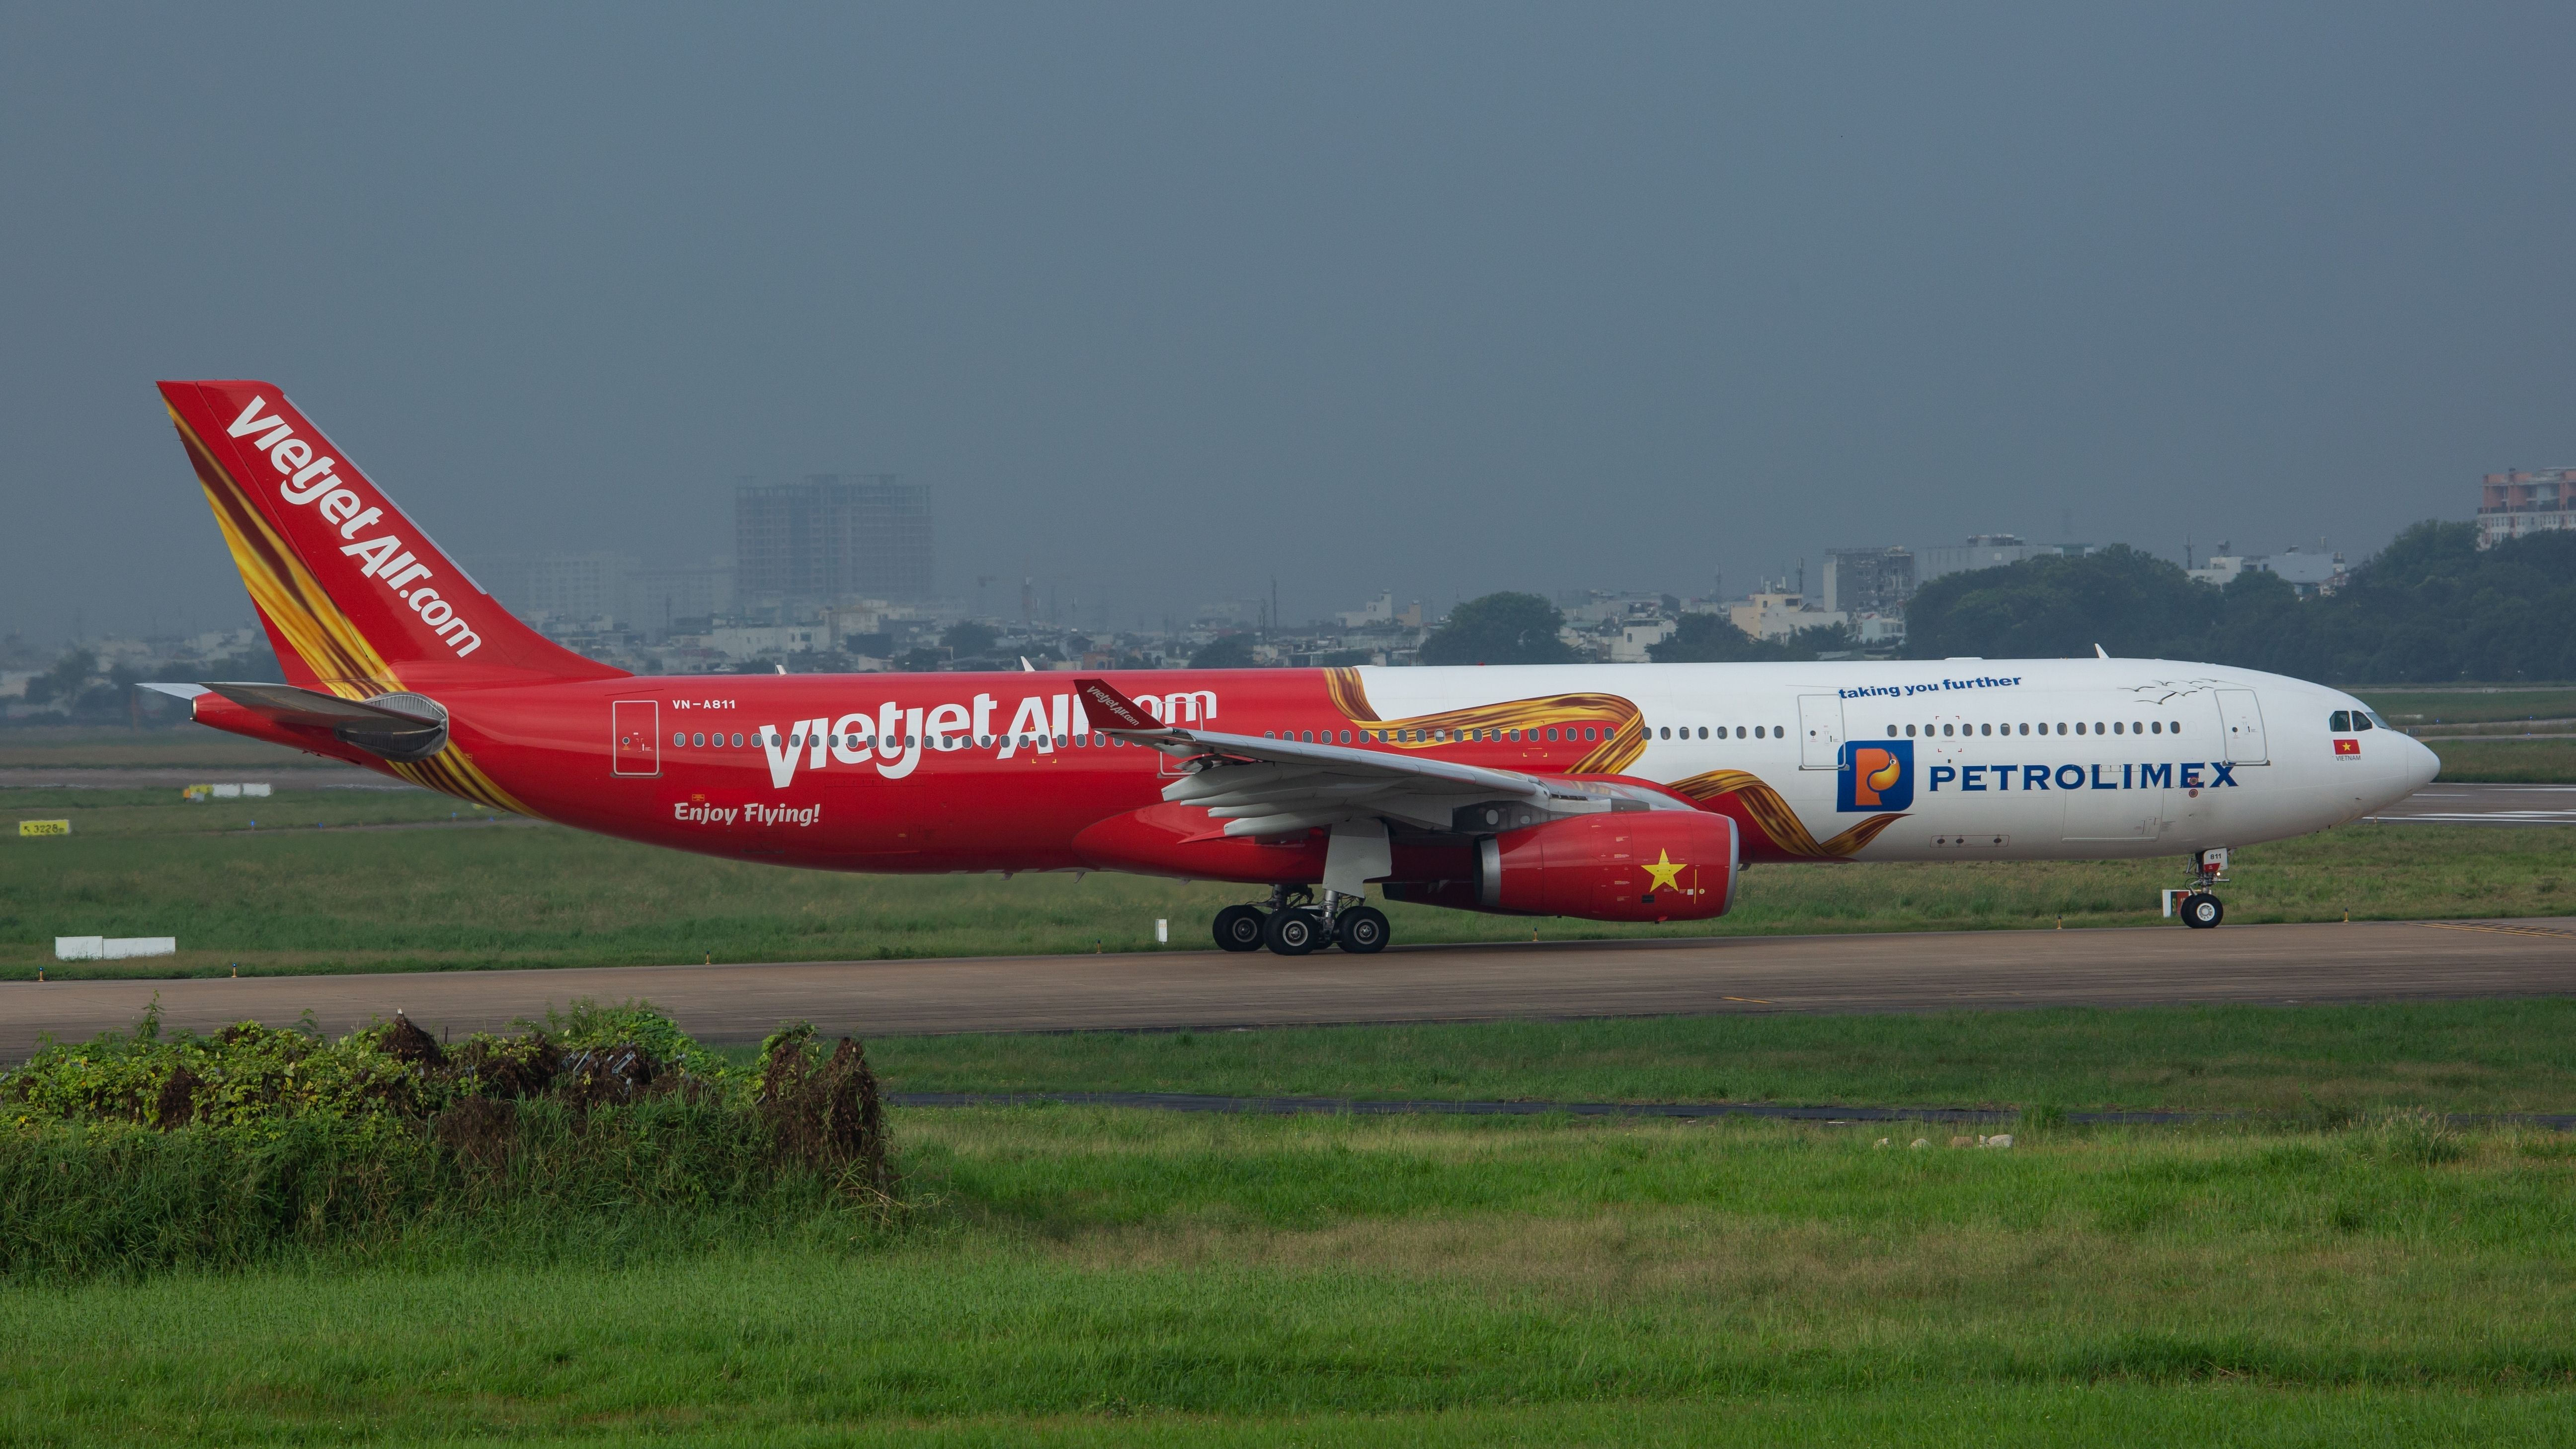 Airbus A330 of VietJet Air with registration VN-A811 with Petrolimex livery prepare for take off at Tan Son Nhat international airport.